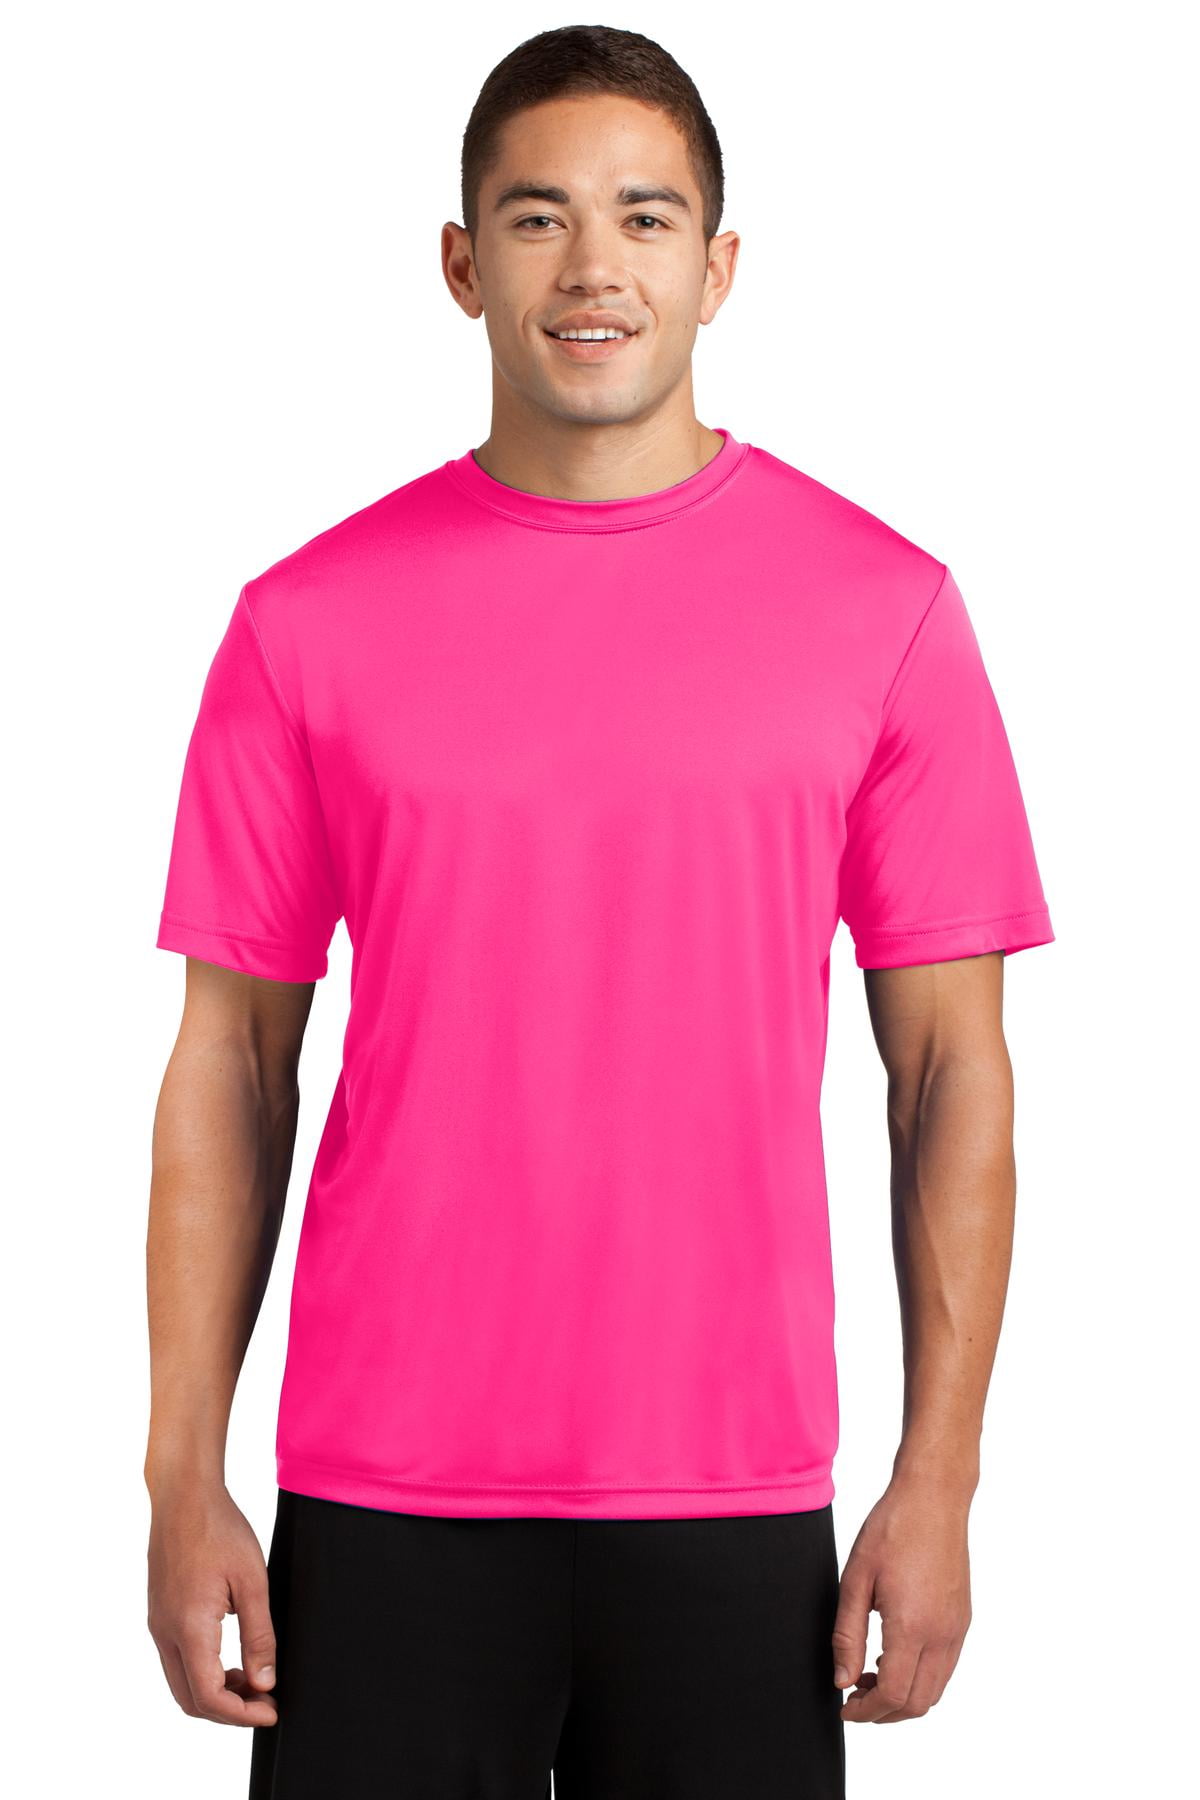 L Neon Competitor Pink - Posicharge - Tee St350 Sport-Tek